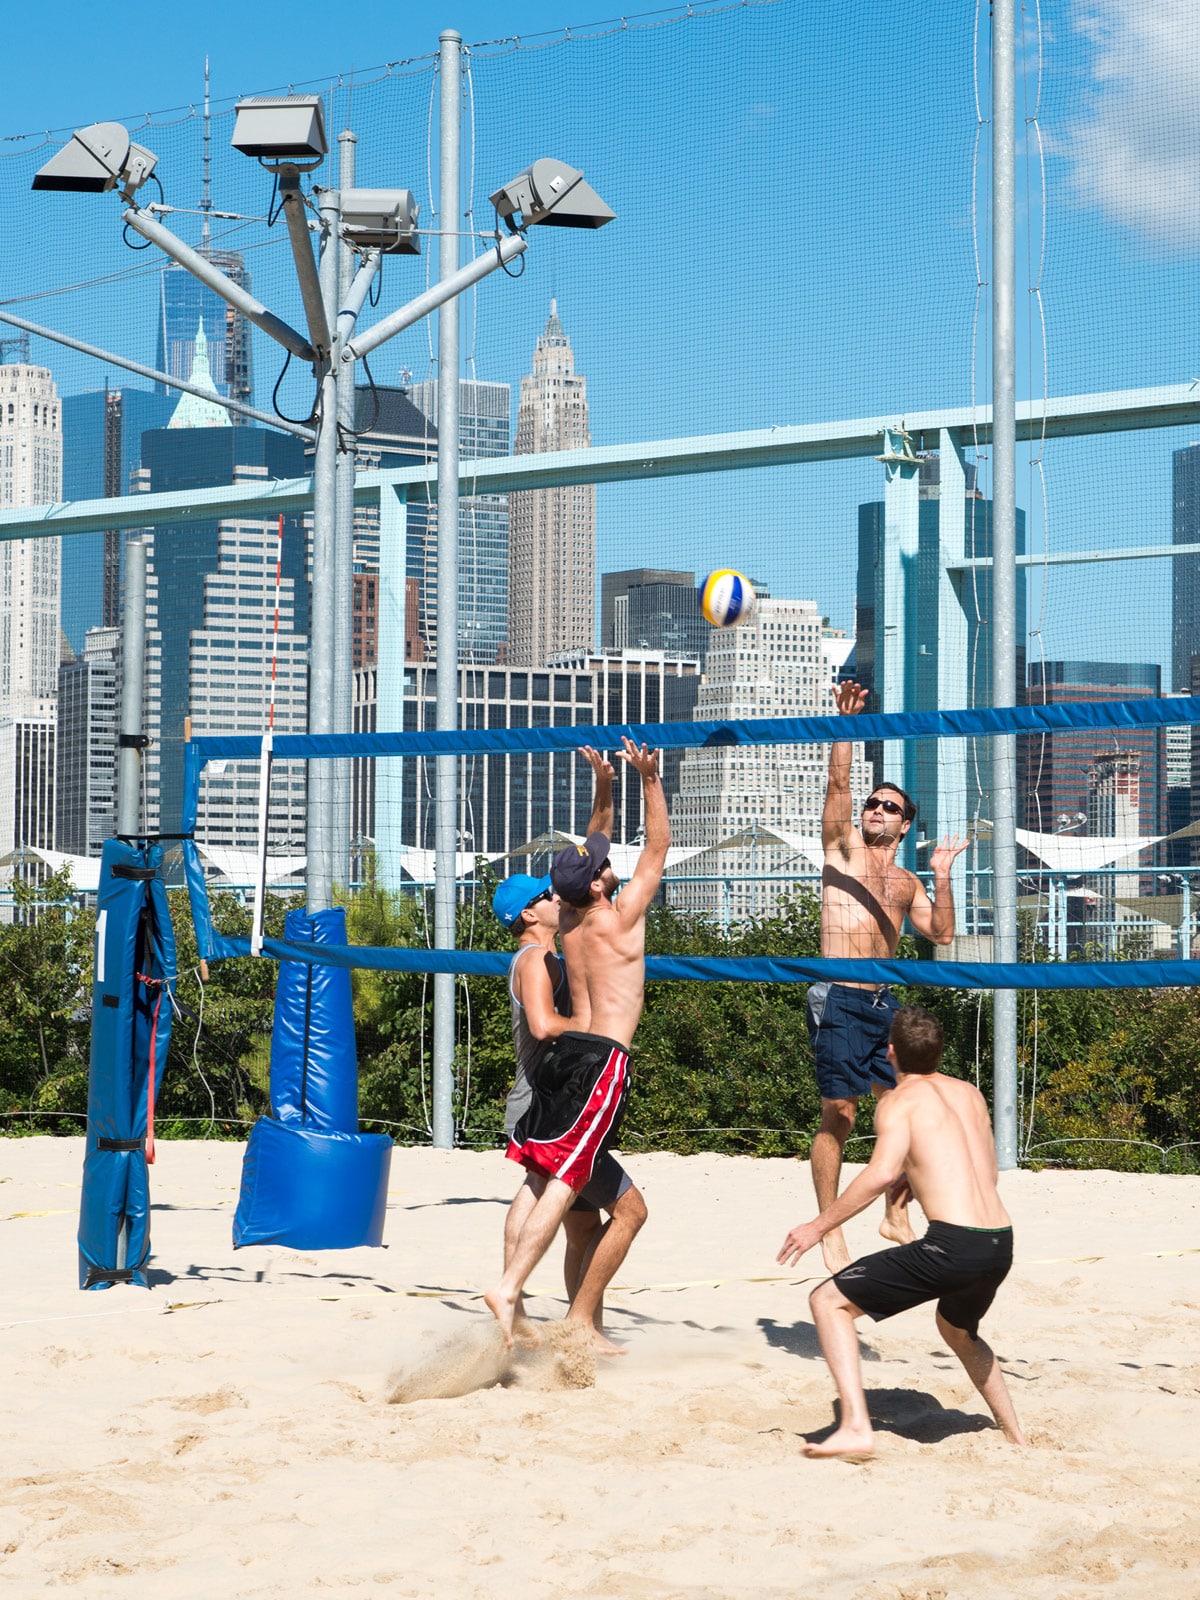 Men playing volleyball on a sand court on a sunny day.